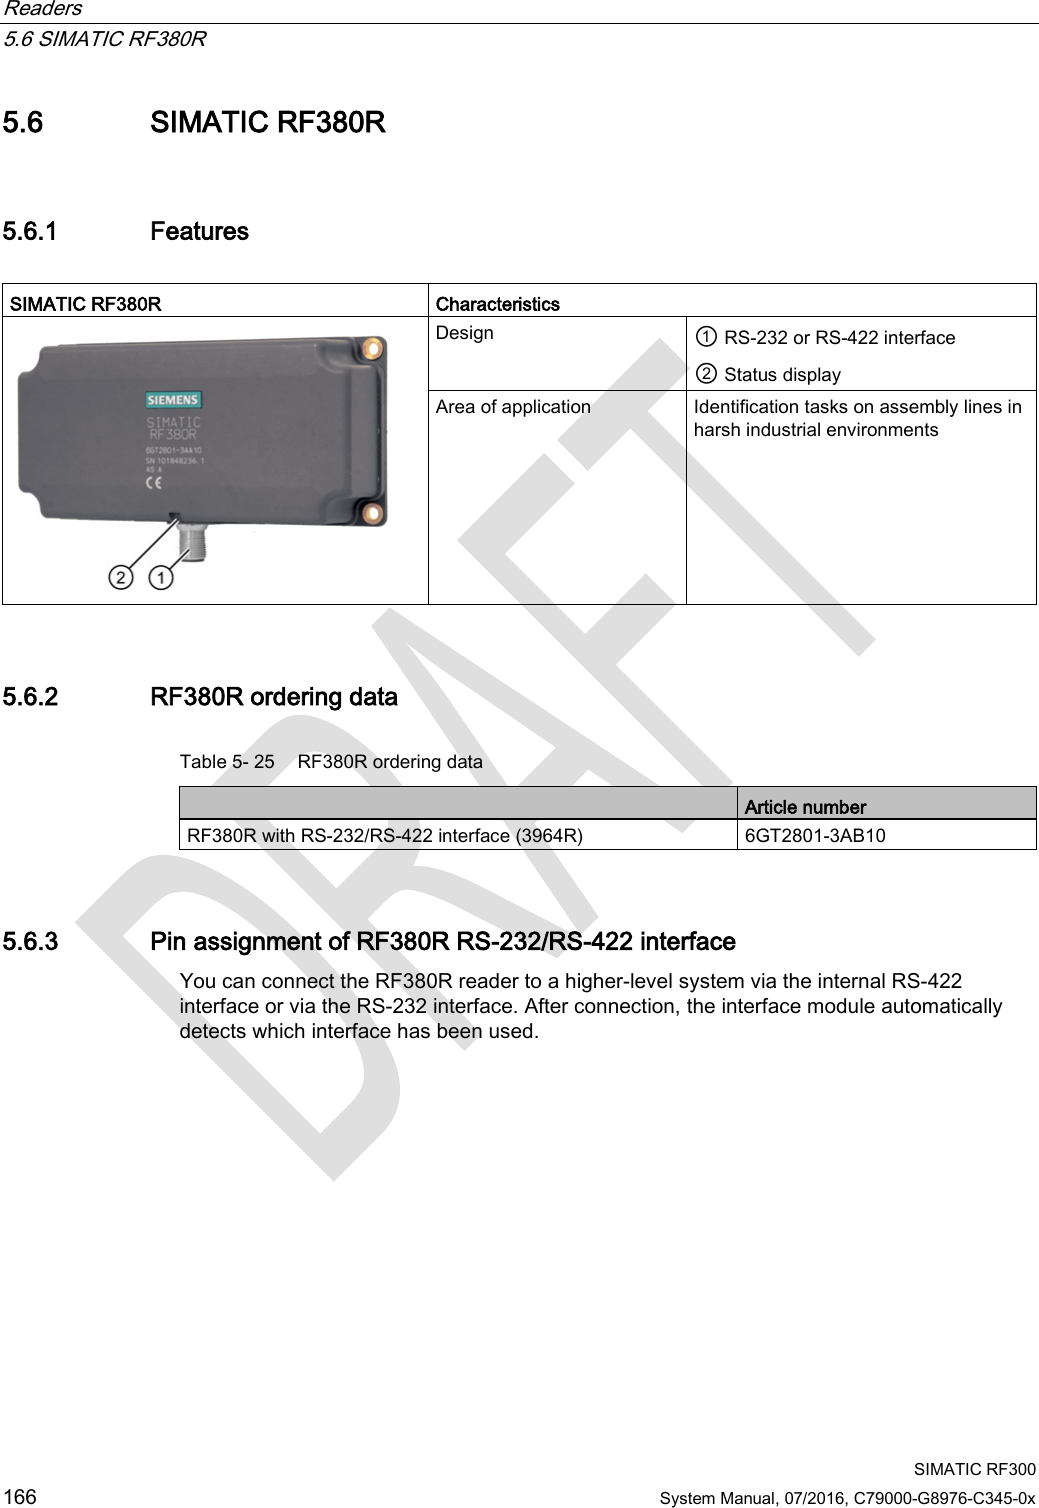 Readers   5.6 SIMATIC RF380R  SIMATIC RF300 166 System Manual, 07/2016, C79000-G8976-C345-0x 5.6 SIMATIC RF380R 5.6.1 Features  SIMATIC RF380R  Characteristics  Design ① RS-232 or RS-422 interface ② Status display Area of application Identification tasks on assembly lines in harsh industrial environments 5.6.2 RF380R ordering data Table 5- 25 RF380R ordering data  Article number RF380R with RS-232/RS-422 interface (3964R) 6GT2801-3AB10 5.6.3 Pin assignment of RF380R RS-232/RS-422 interface You can connect the RF380R reader to a higher-level system via the internal RS-422 interface or via the RS-232 interface. After connection, the interface module automatically detects which interface has been used. 